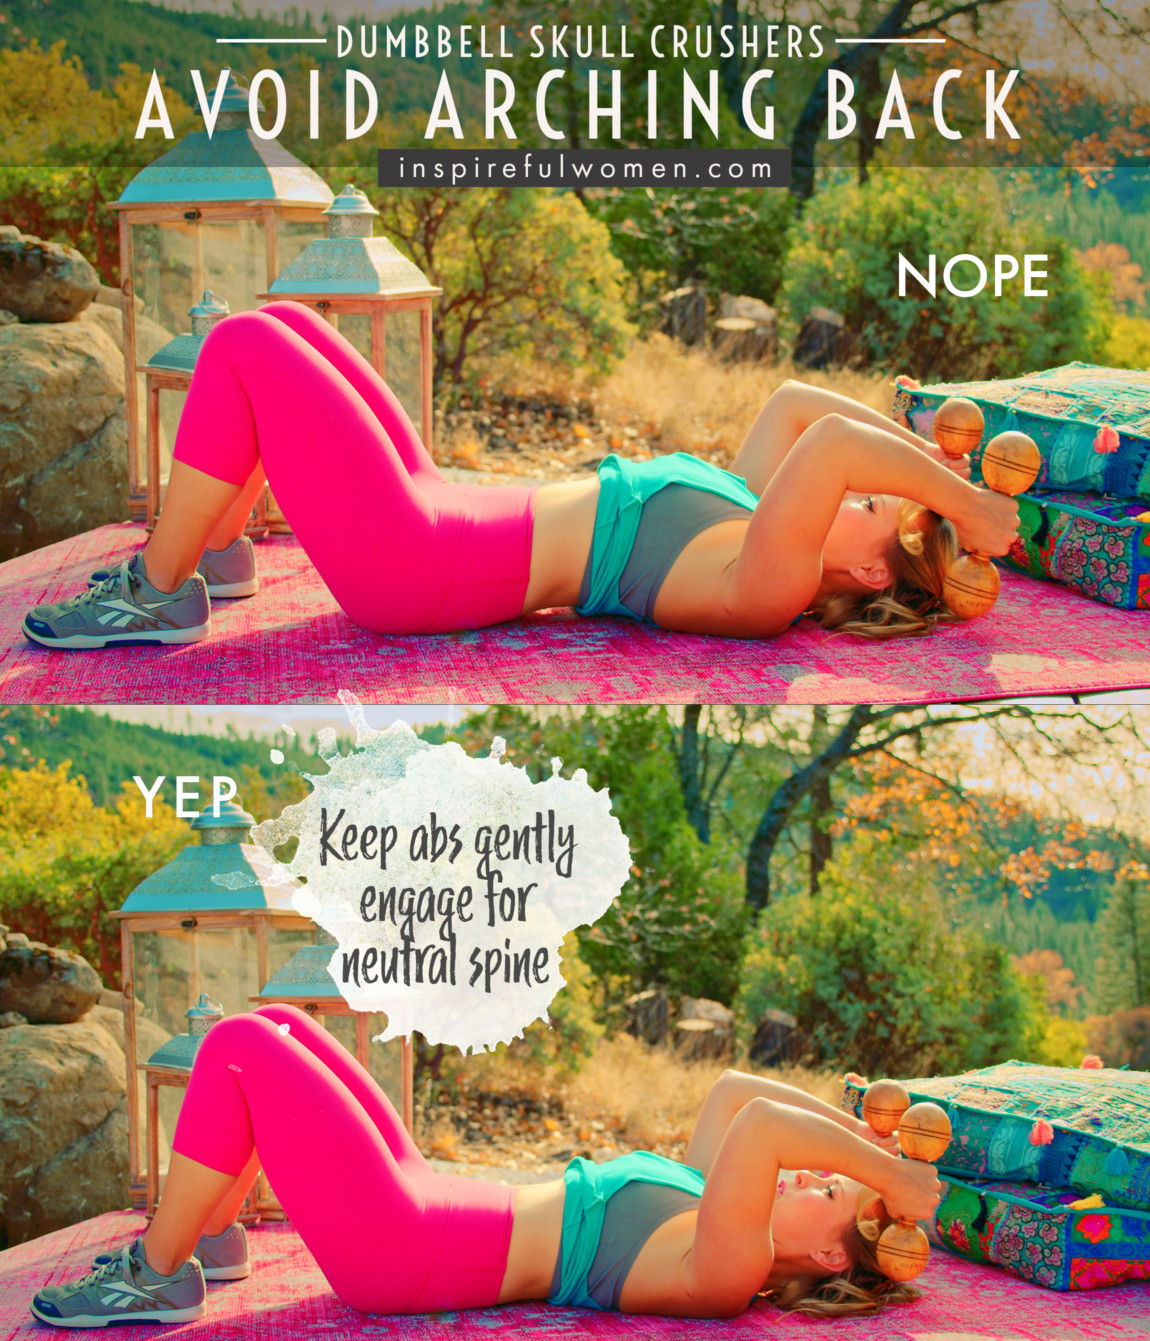 avoid-arching-back-keep-abs-gently-engage-skull-crushers-proper